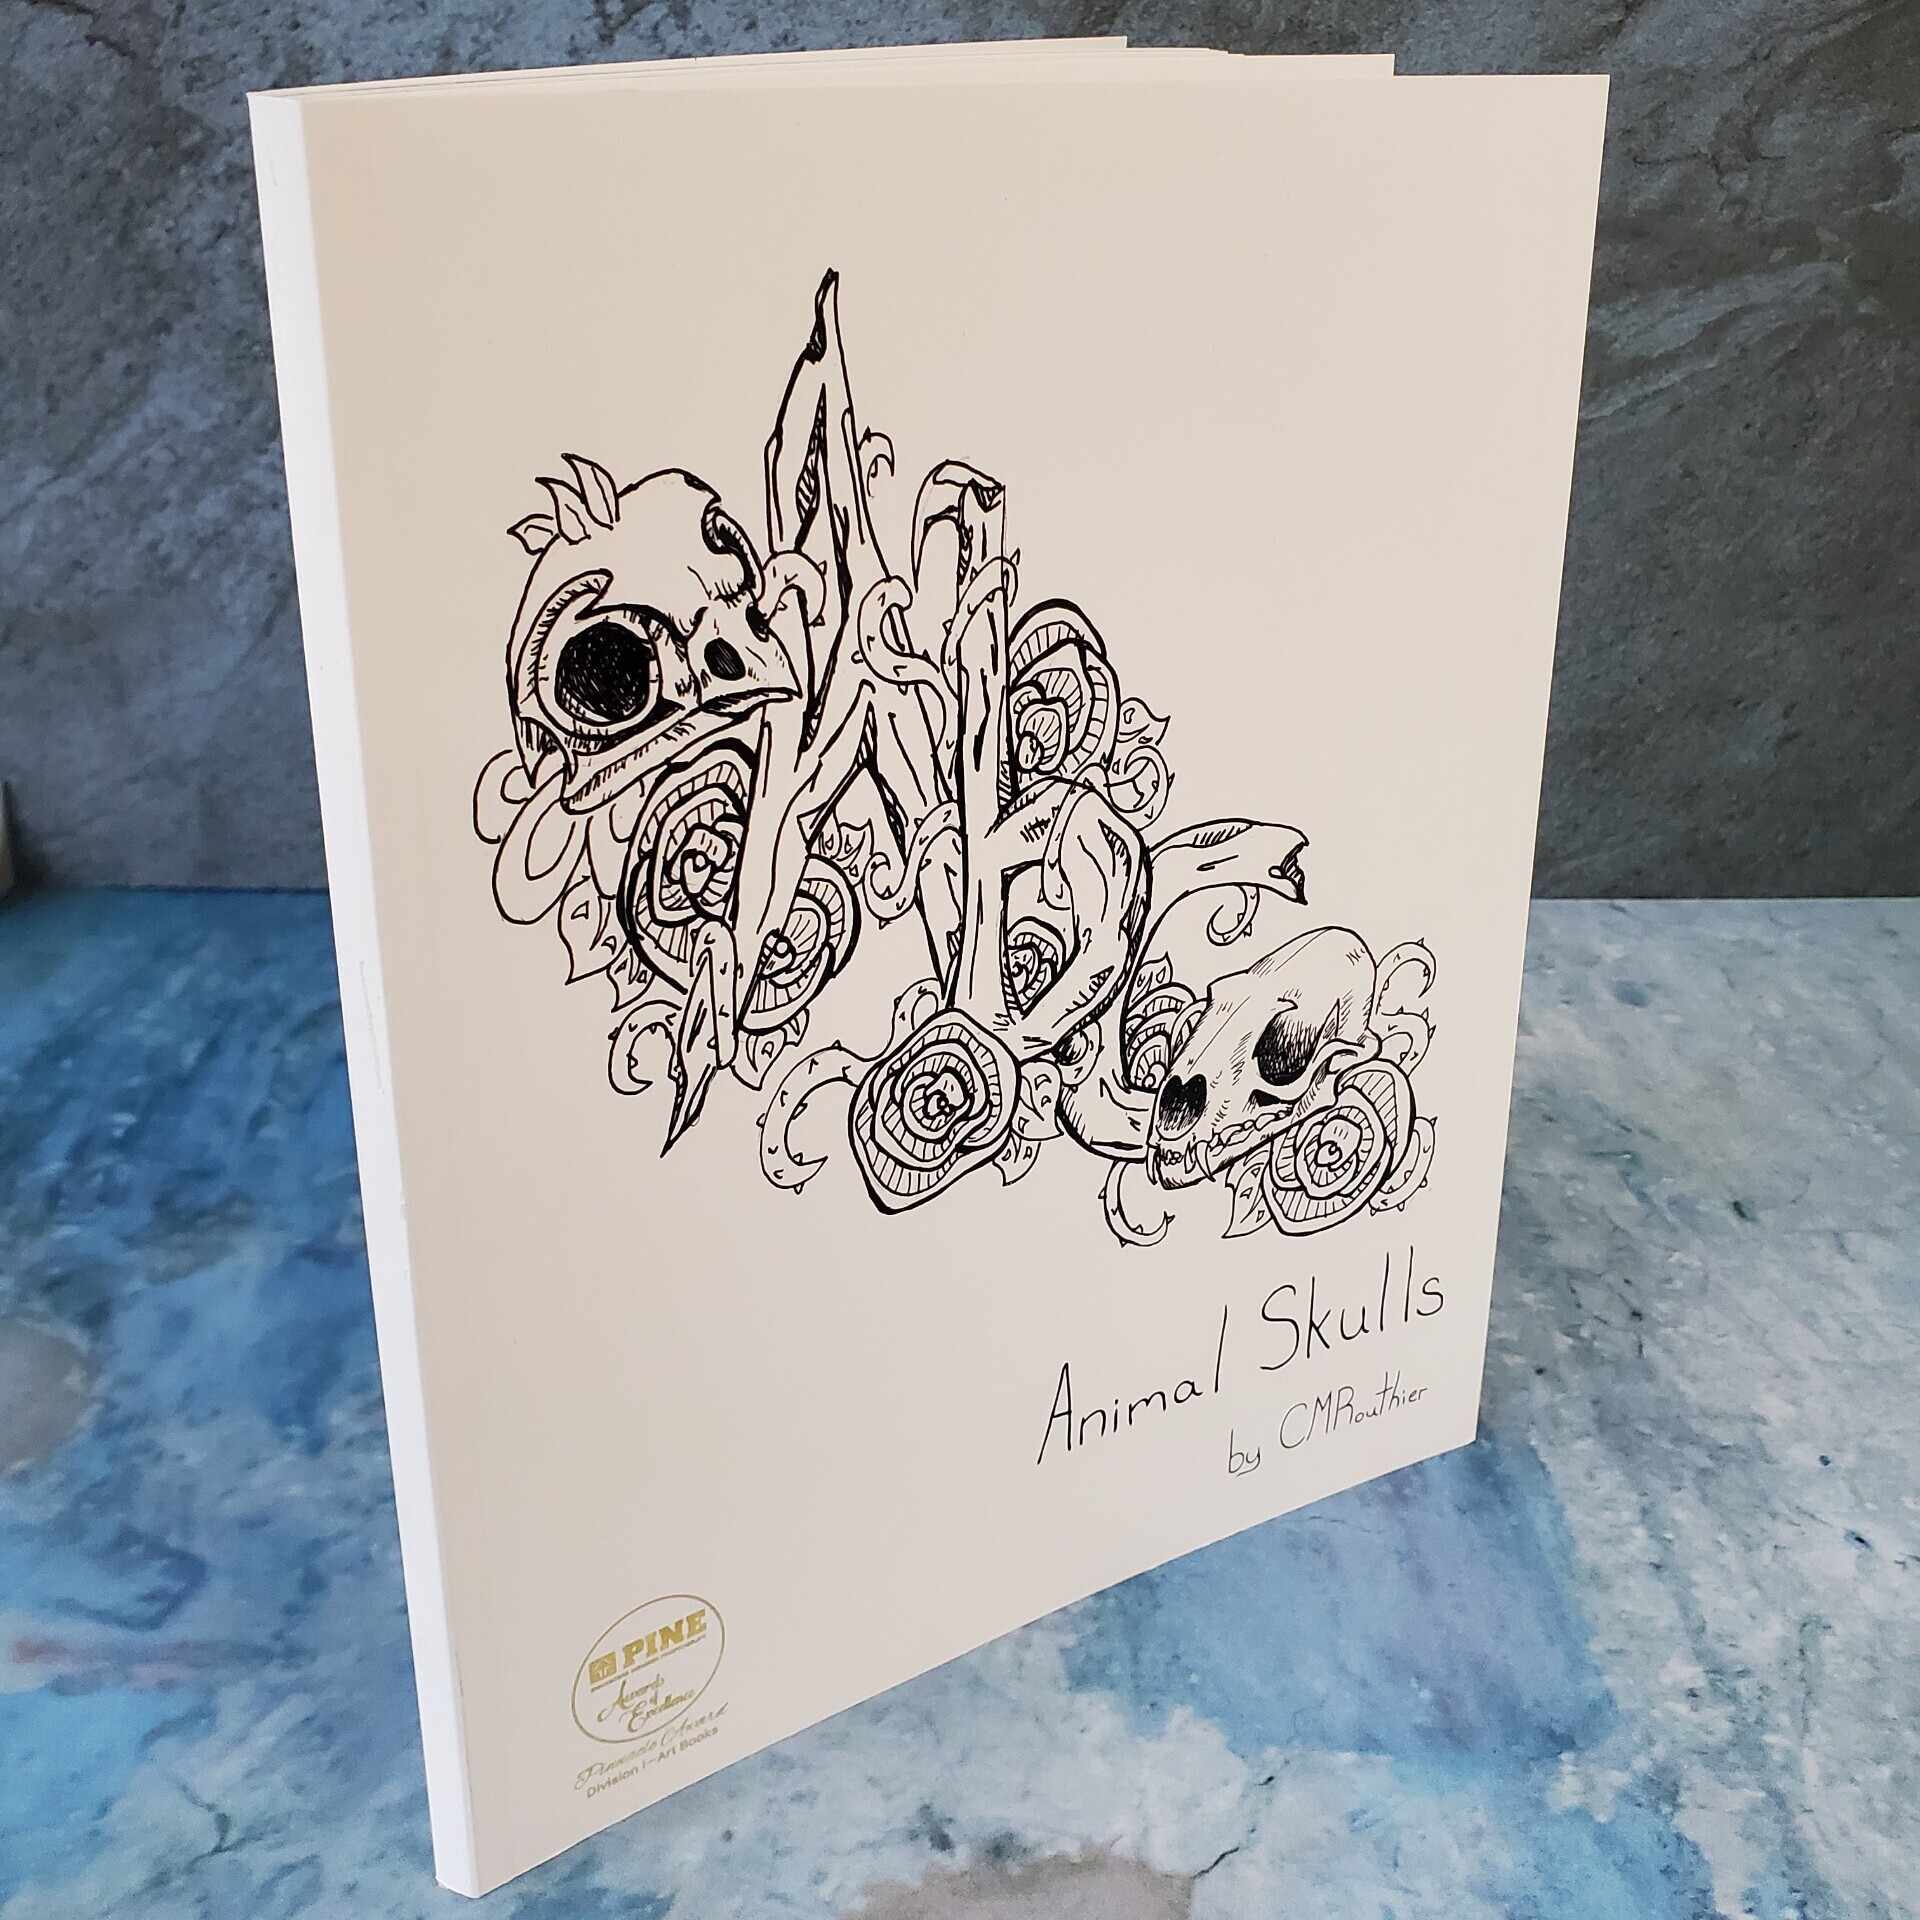 PINE Awards of Excellence - Pinnacle Award Winning perfect bound book - Animal Skulls by CMRouthier.